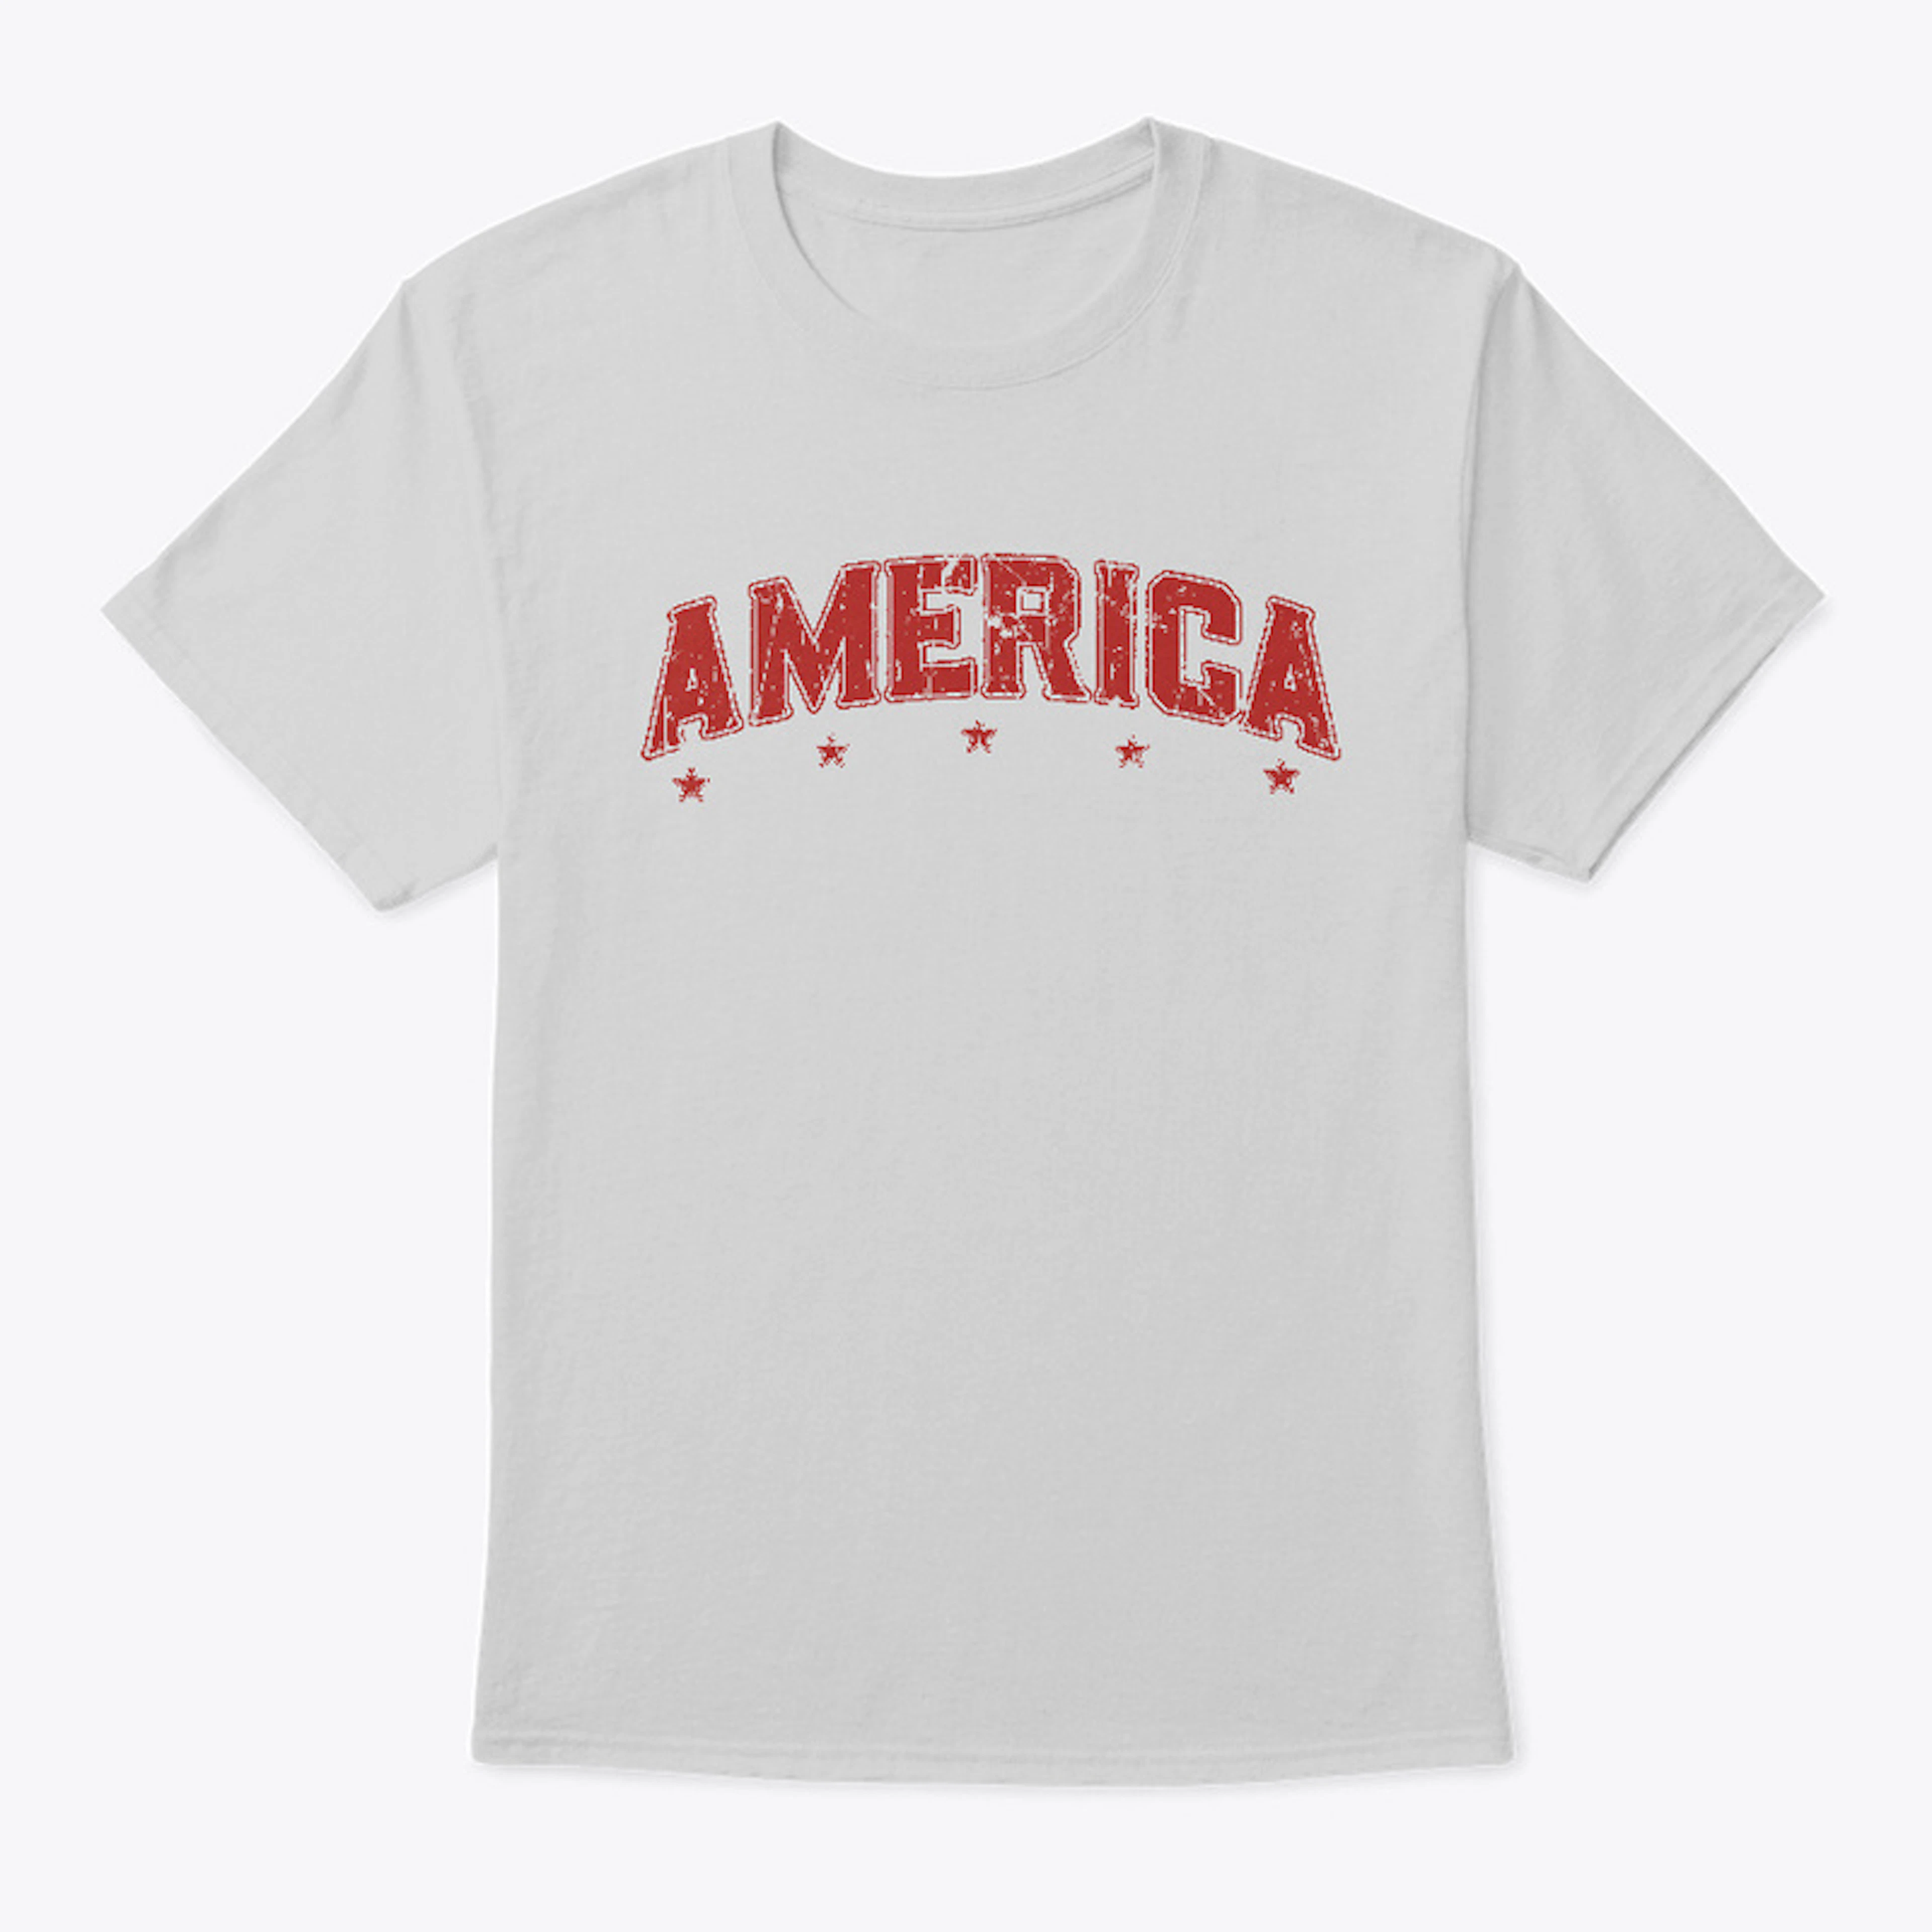 America Casual Tee For Spring & Summer